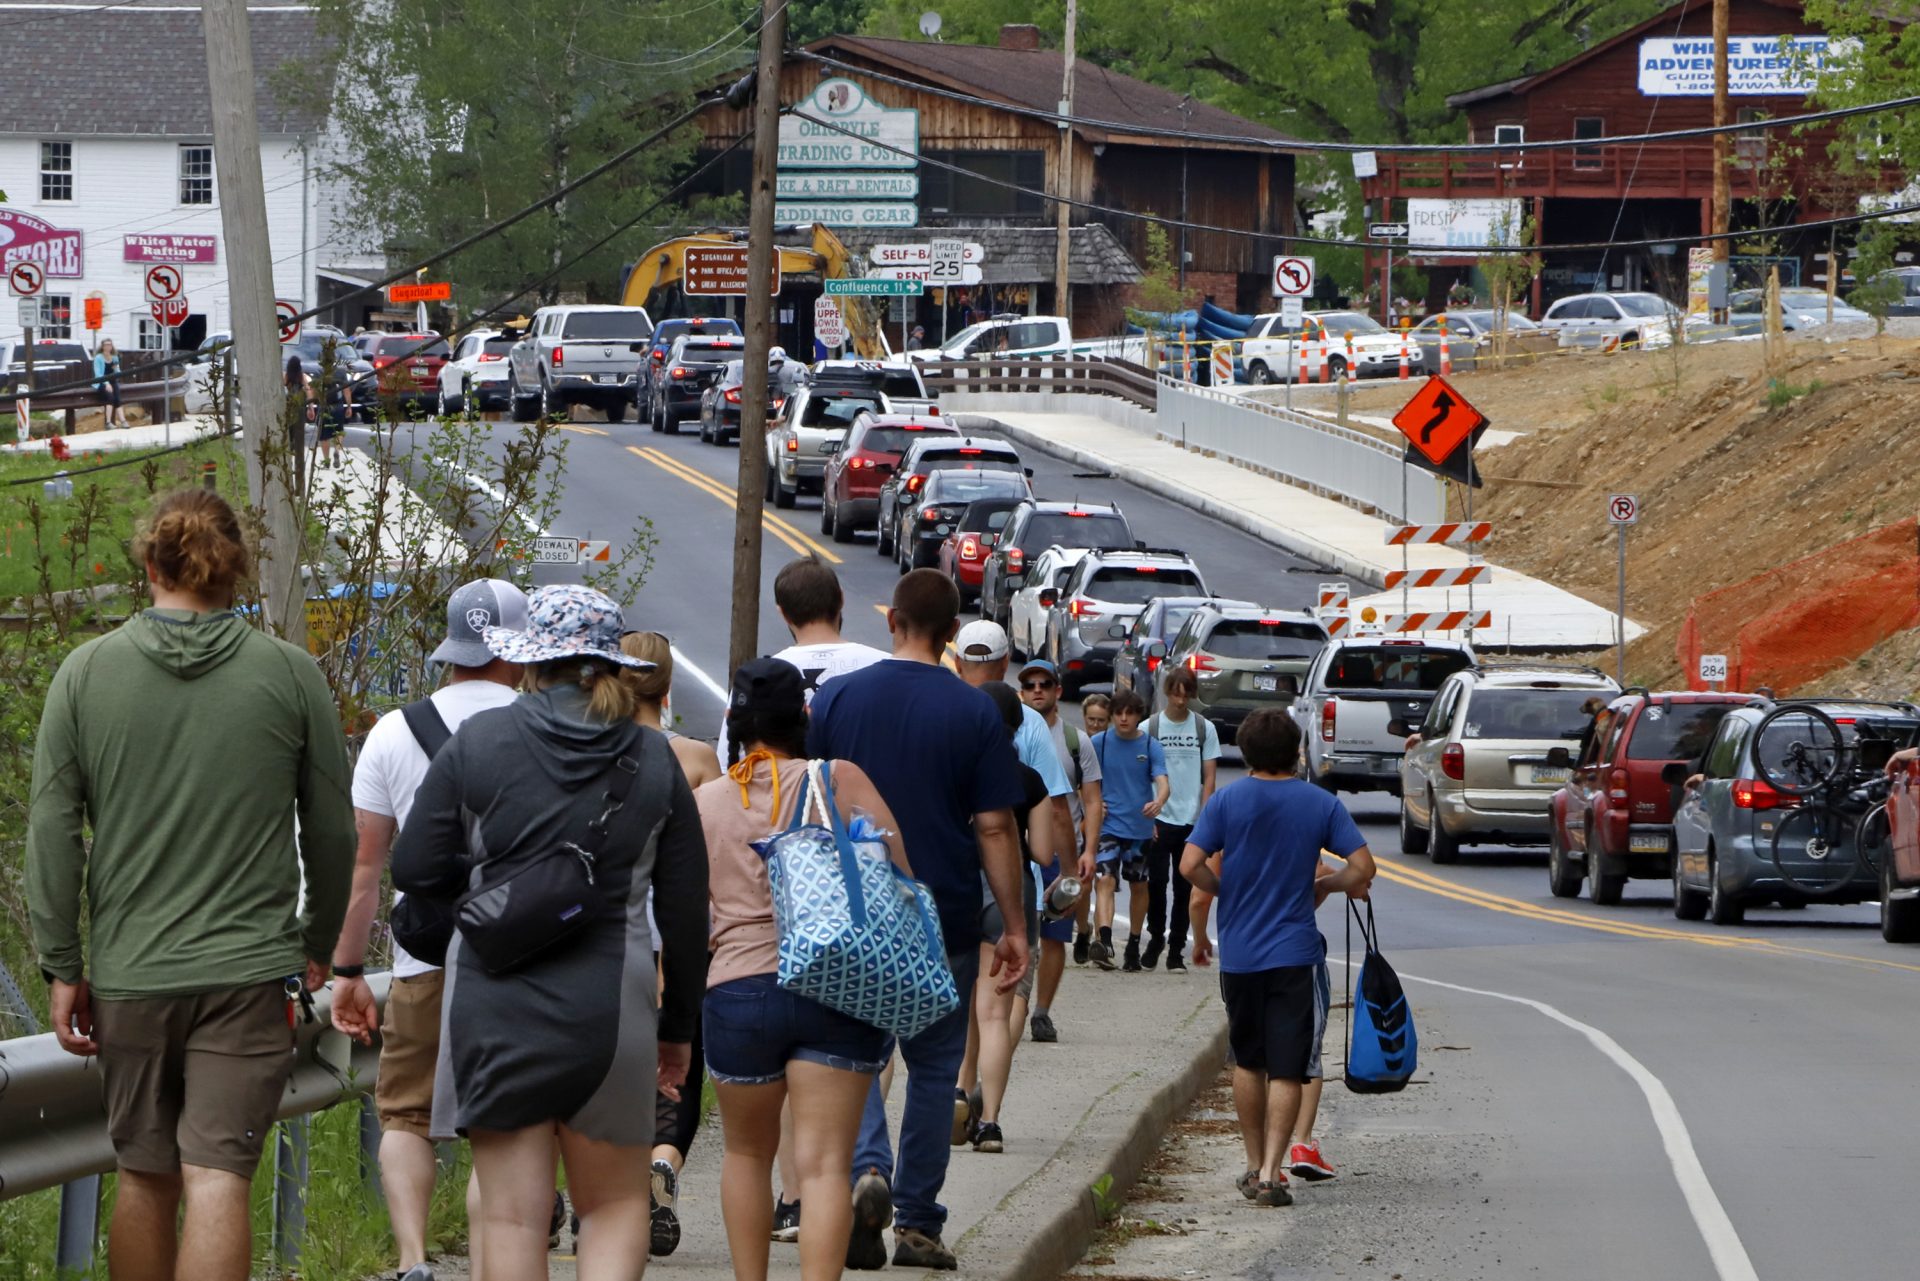 Traffic is backed up as people wait to get into Ohiopyle State Park in Ohiopyle, Pa. on Sunday, May 24, 2020.